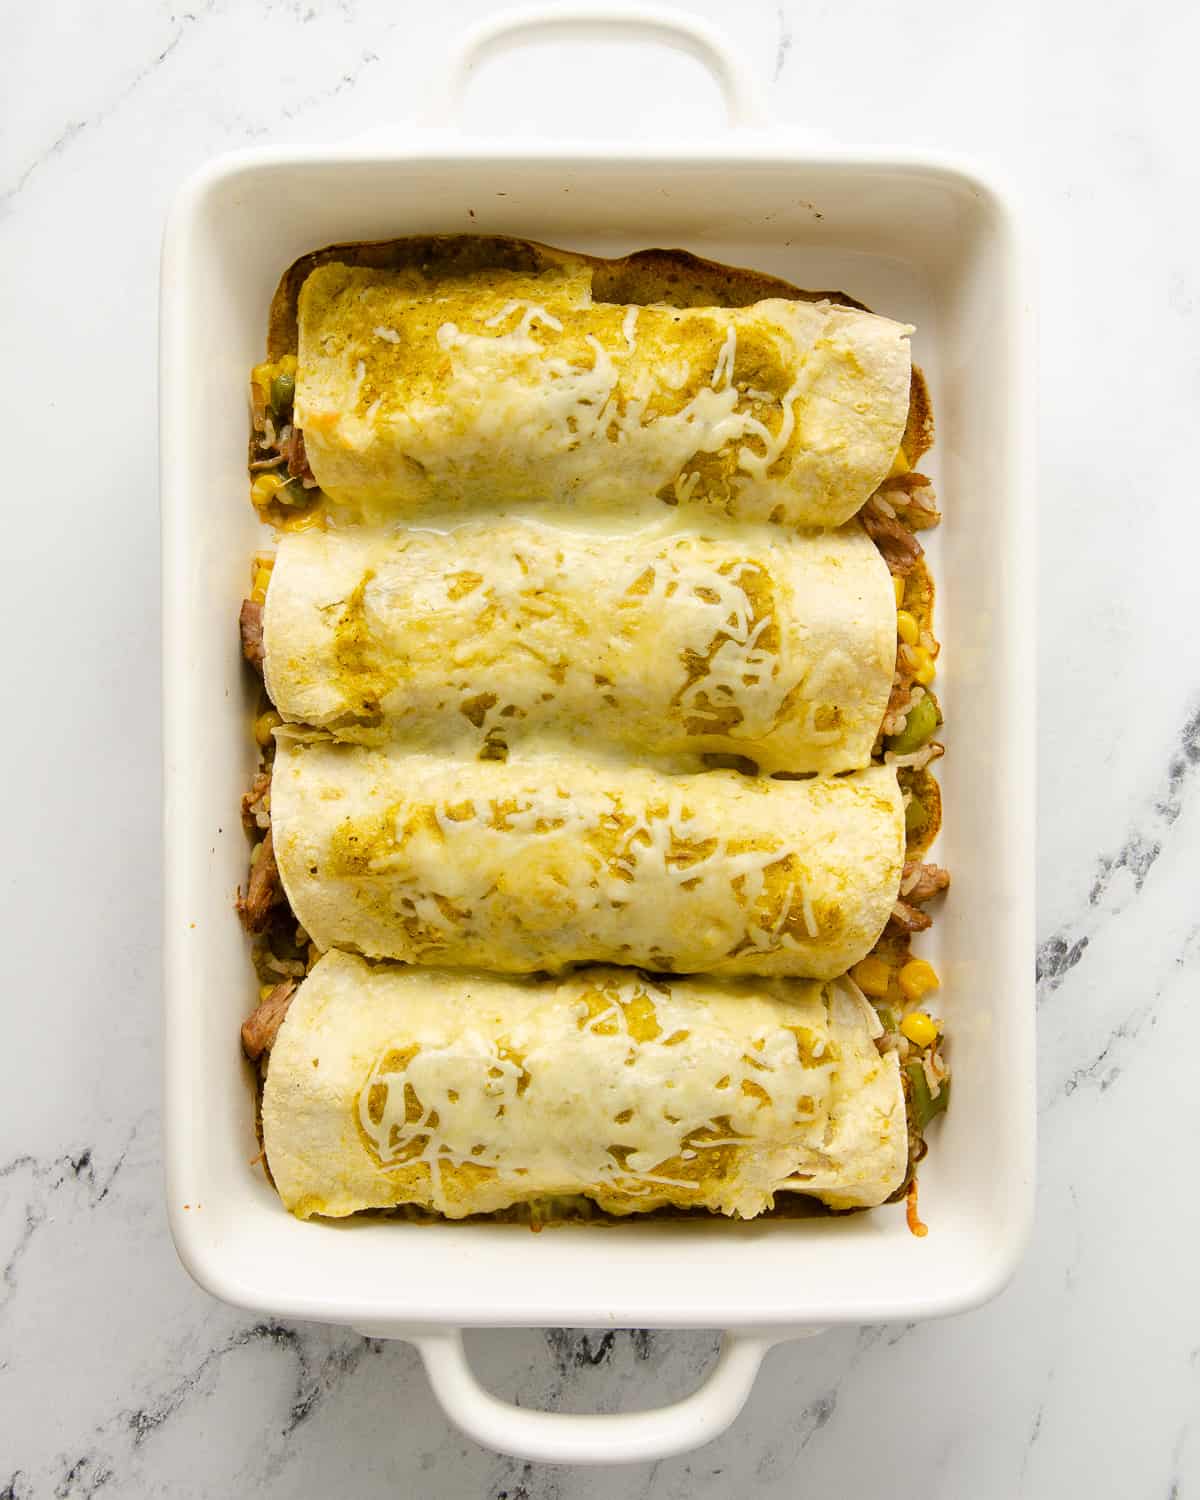 Baked carnitas enchiladas topped with sauce and cheese after baking.